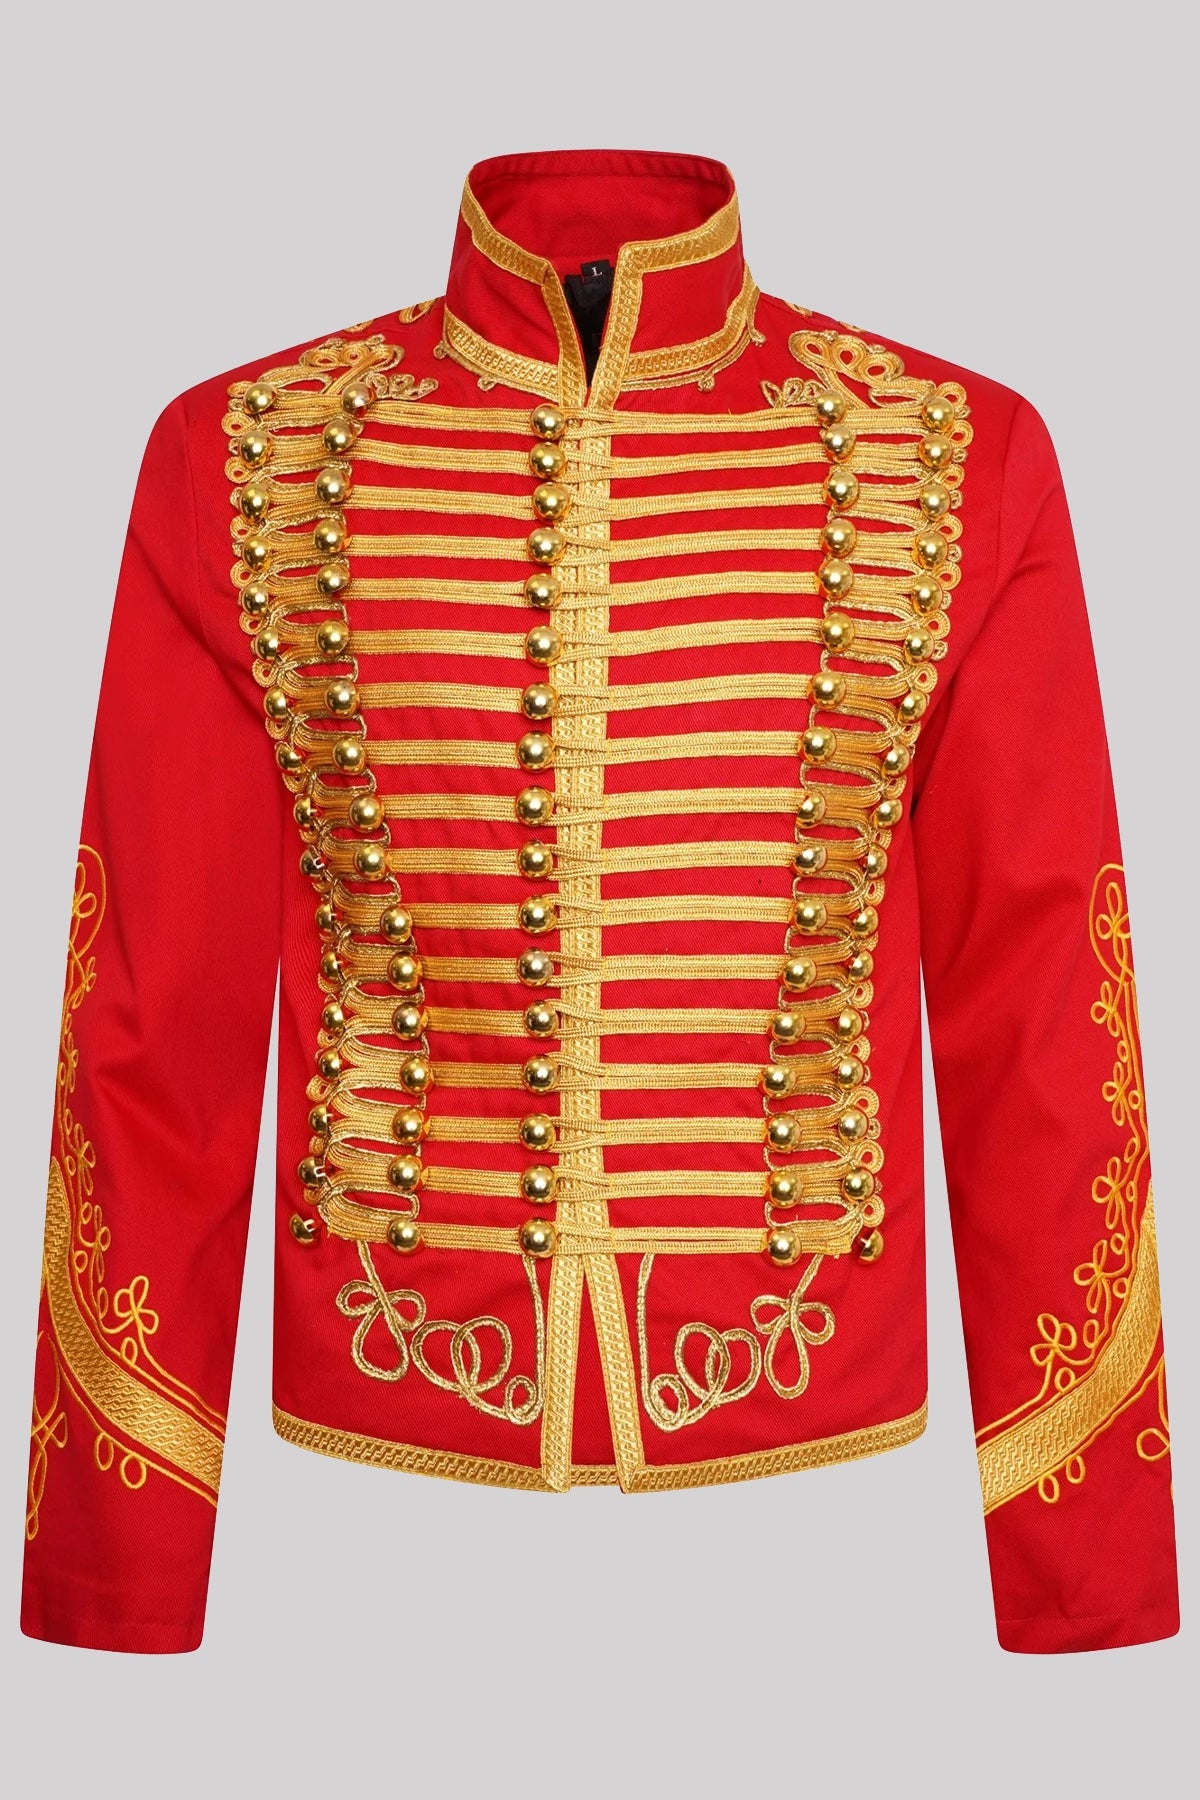 Ro Rox Men's Adam Luxe Military Drummer Red Parade Jacket